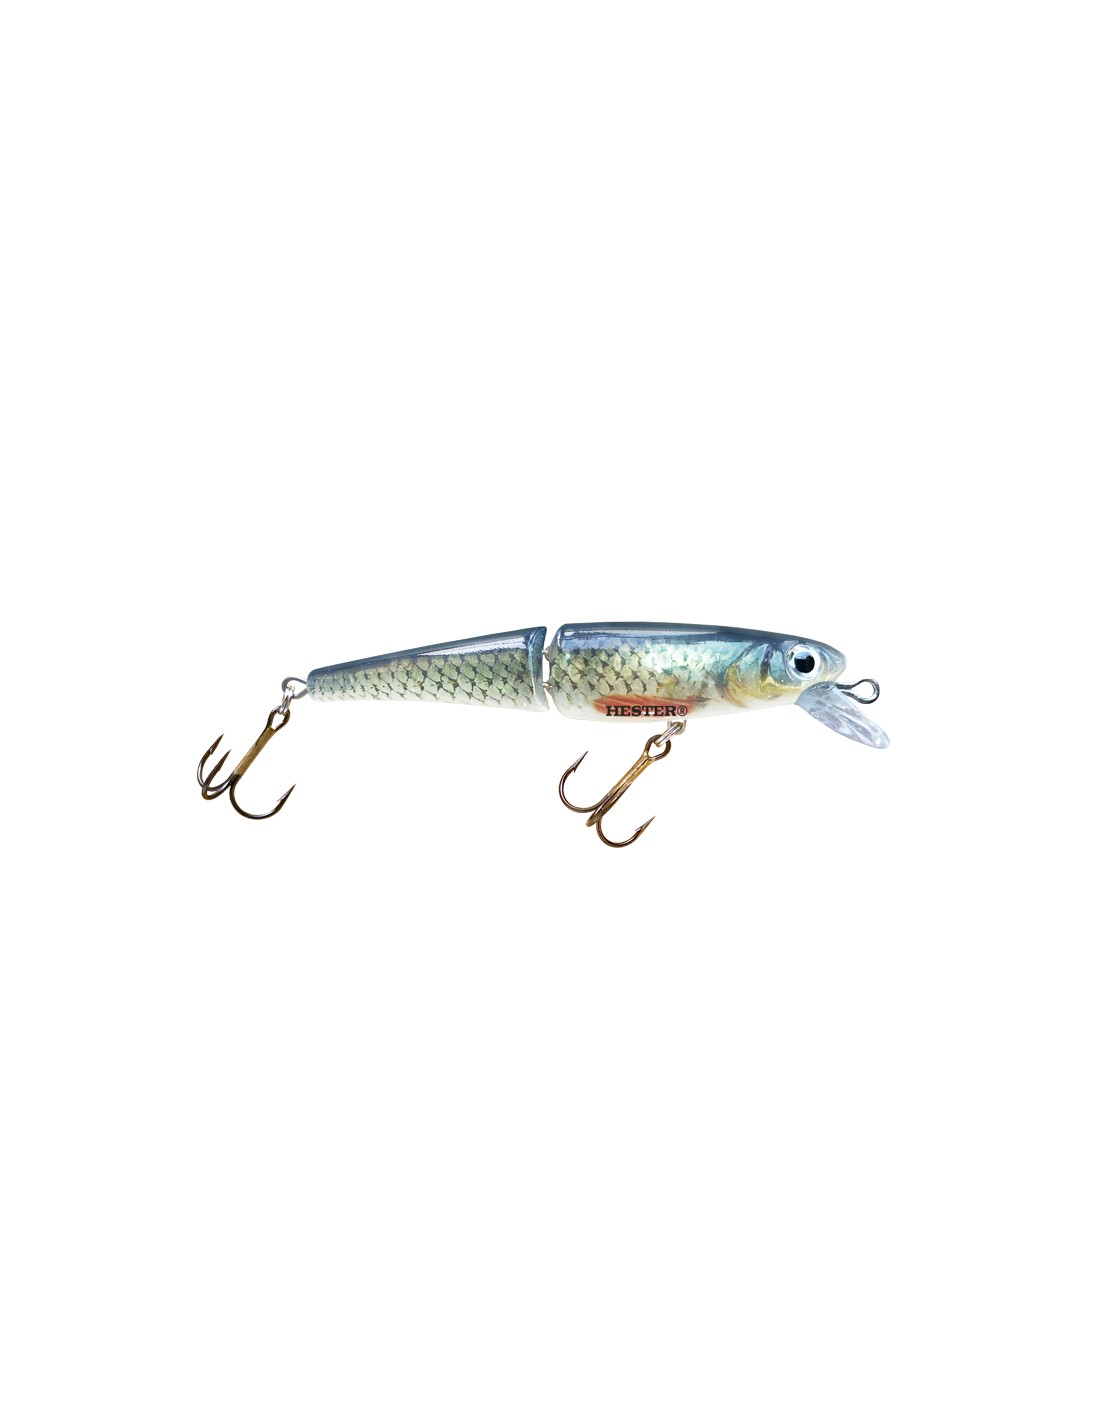 70mm 10g 0.3-0.5m jointed trout minnow